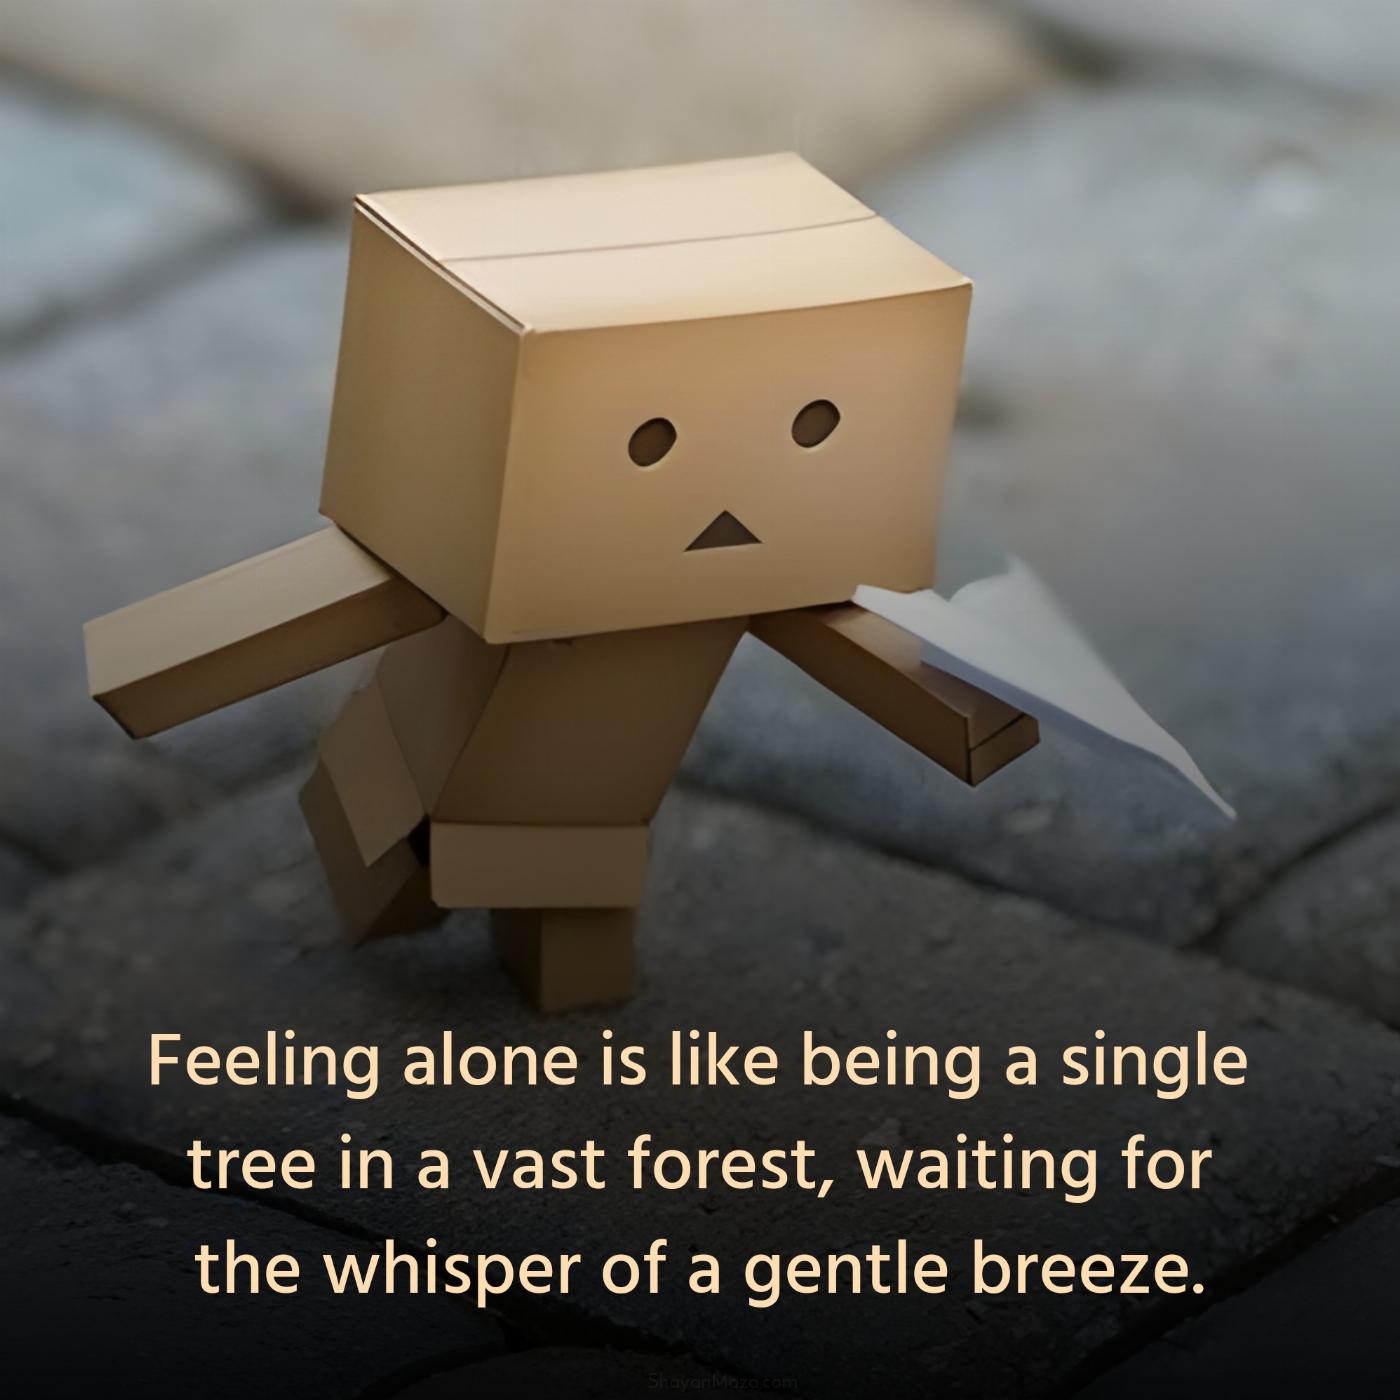 Feeling alone is like being a single tree in a vast forest